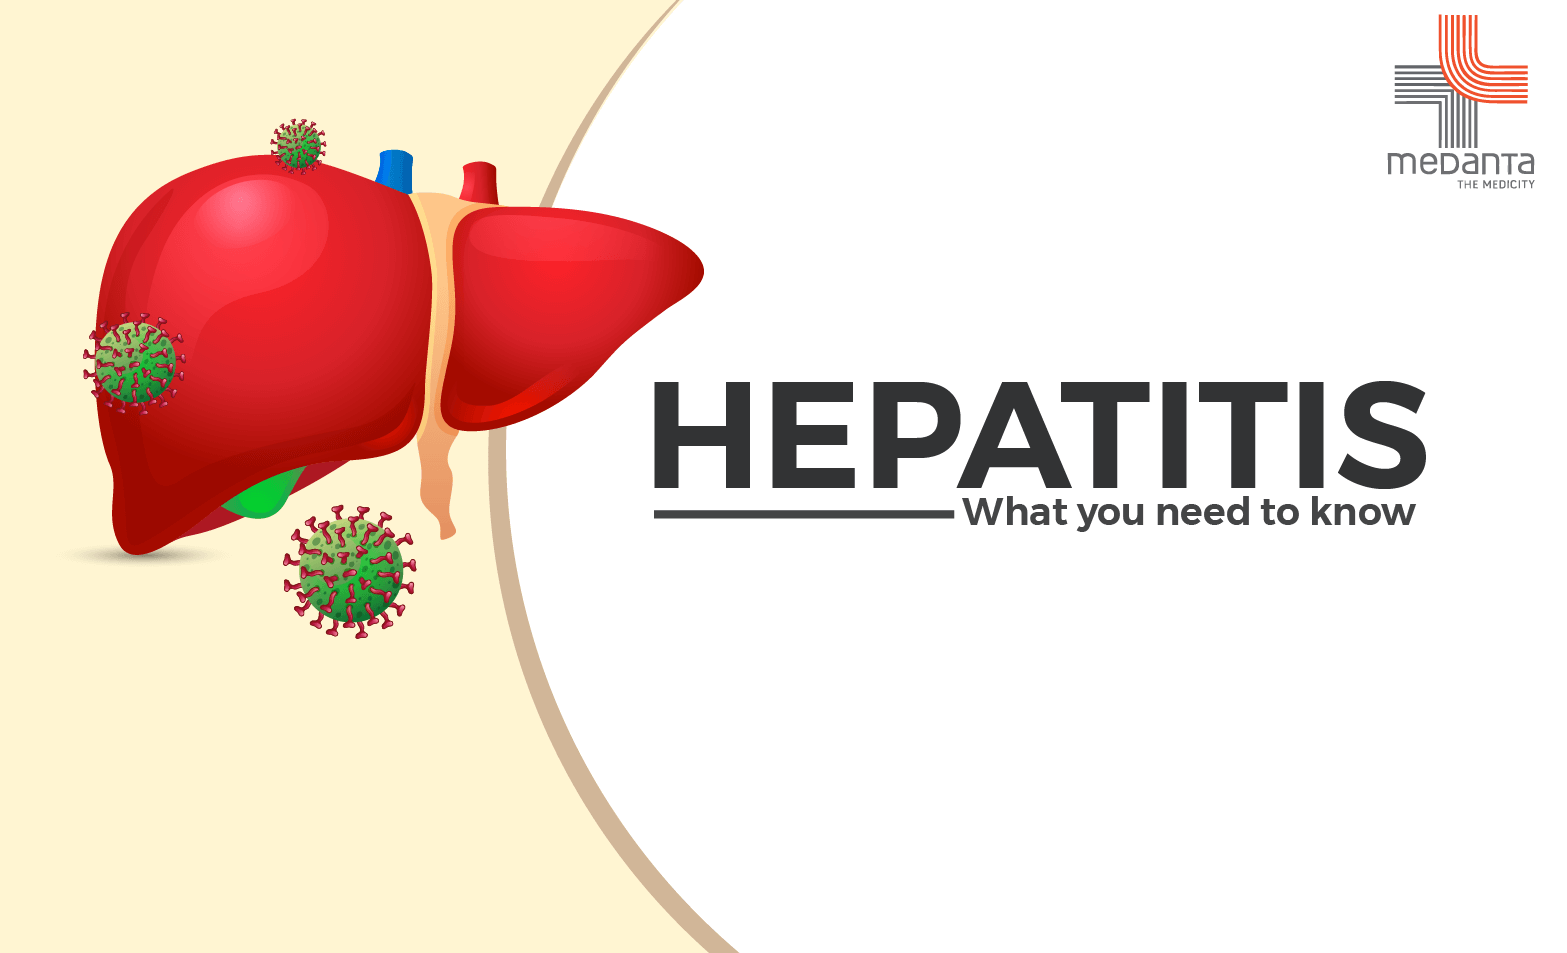 world-hepatitis-day-2019-what-you-need-to-know-about-hepatitis